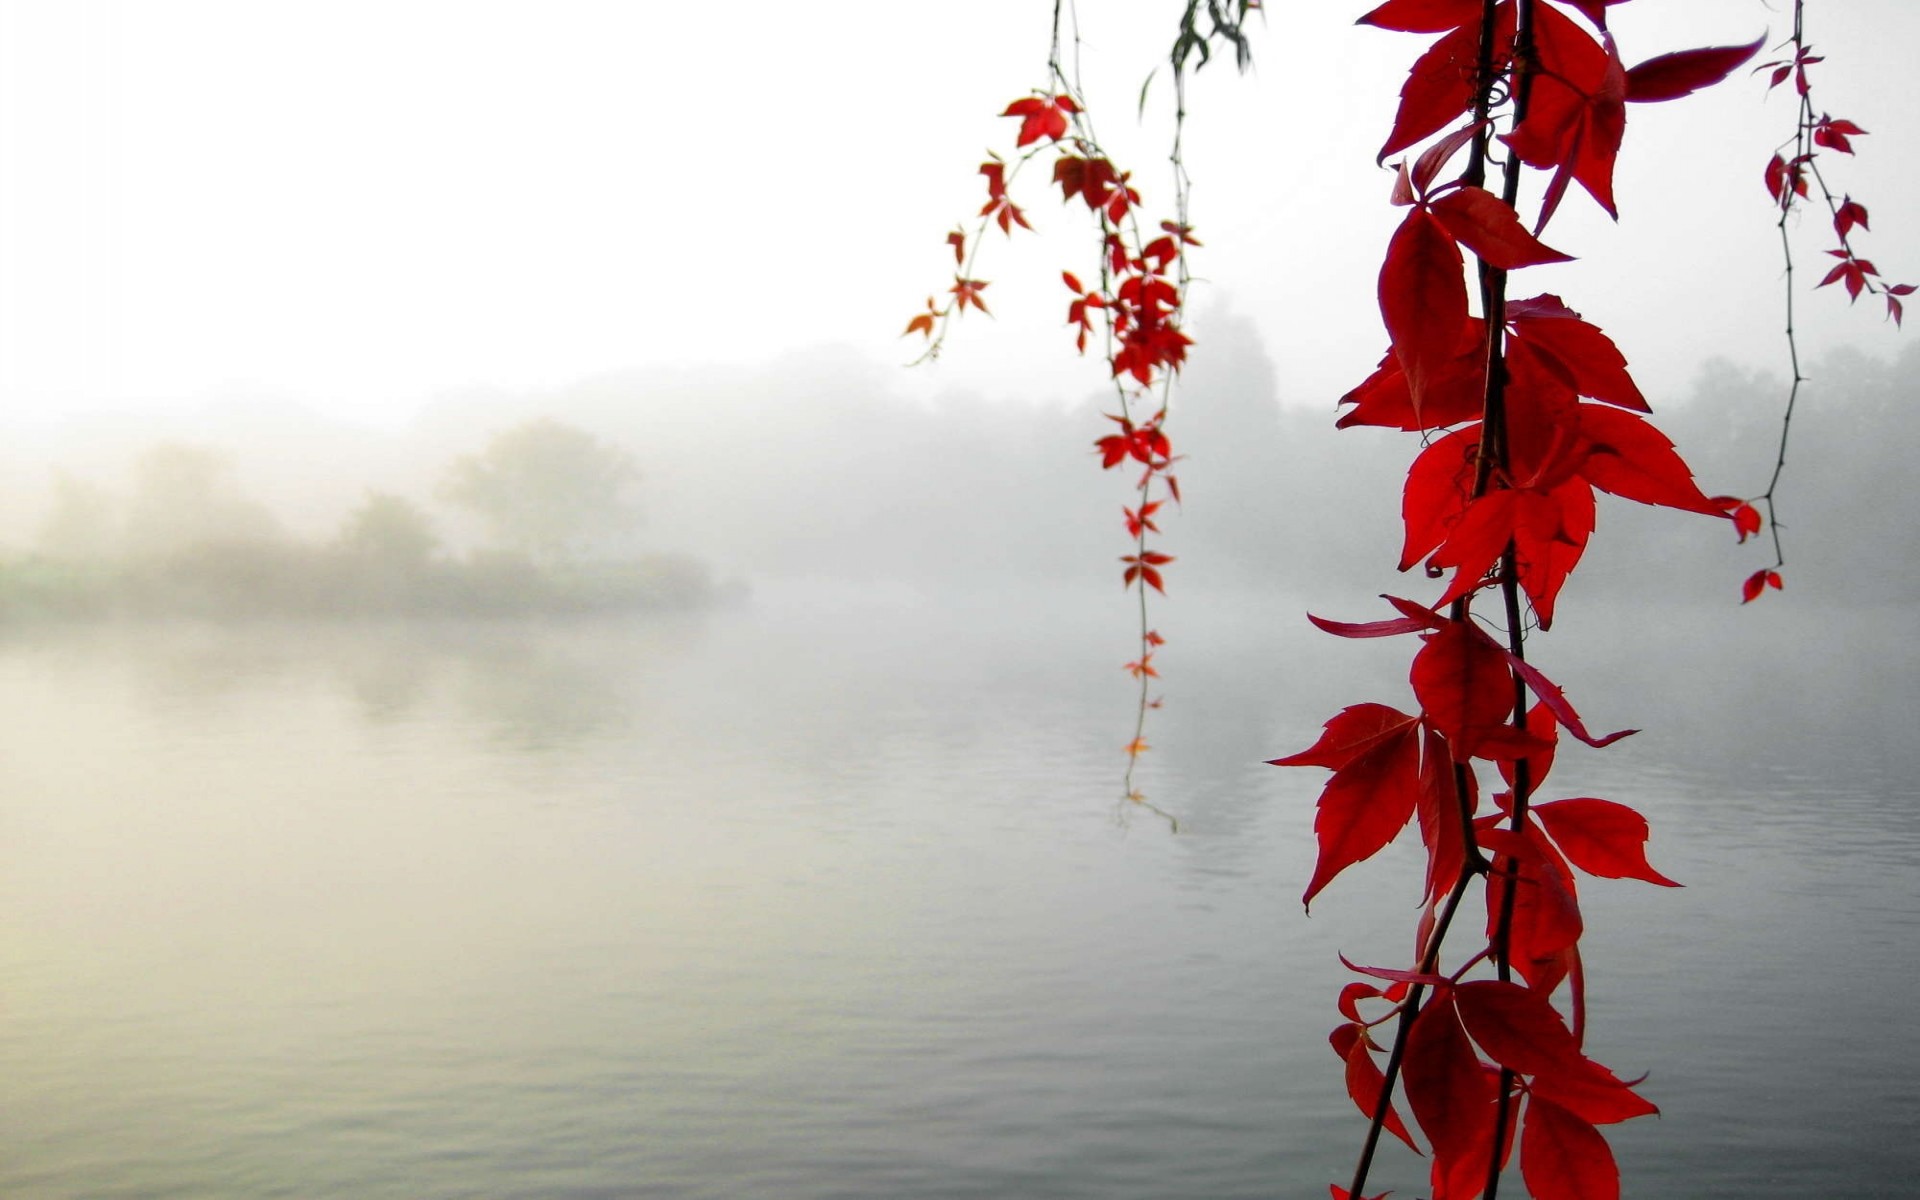 Maple, Mist, Branch, Islands, Lakes, Morning, Fresh - Life Quotes In Telugu - HD Wallpaper 